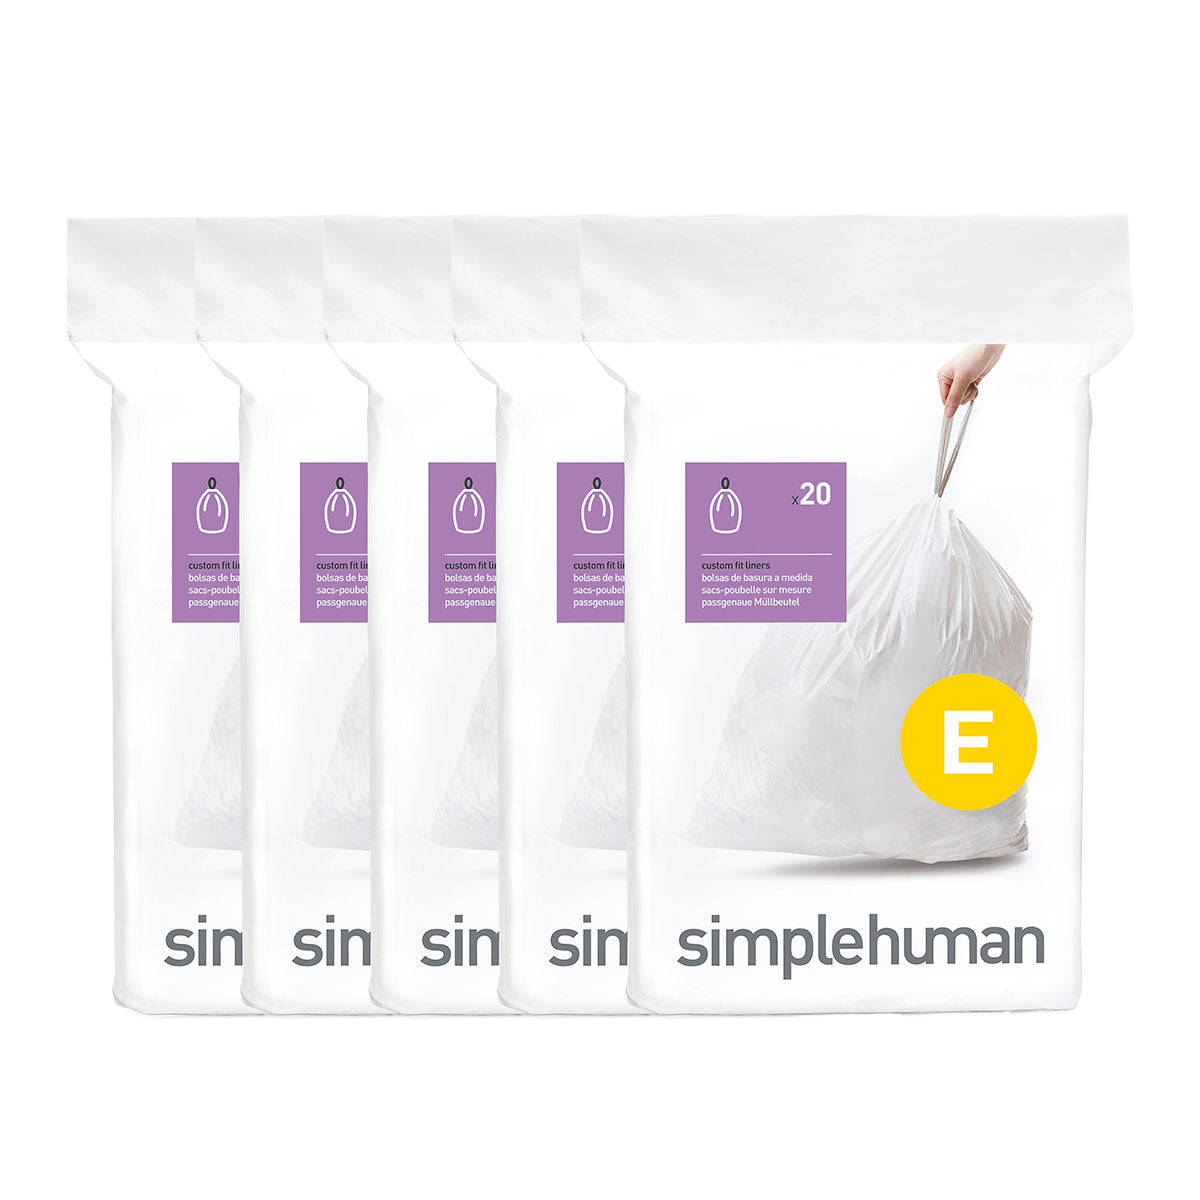 simplehuman Code E 60-Pack 20-Liter Custom Fit Liners in White